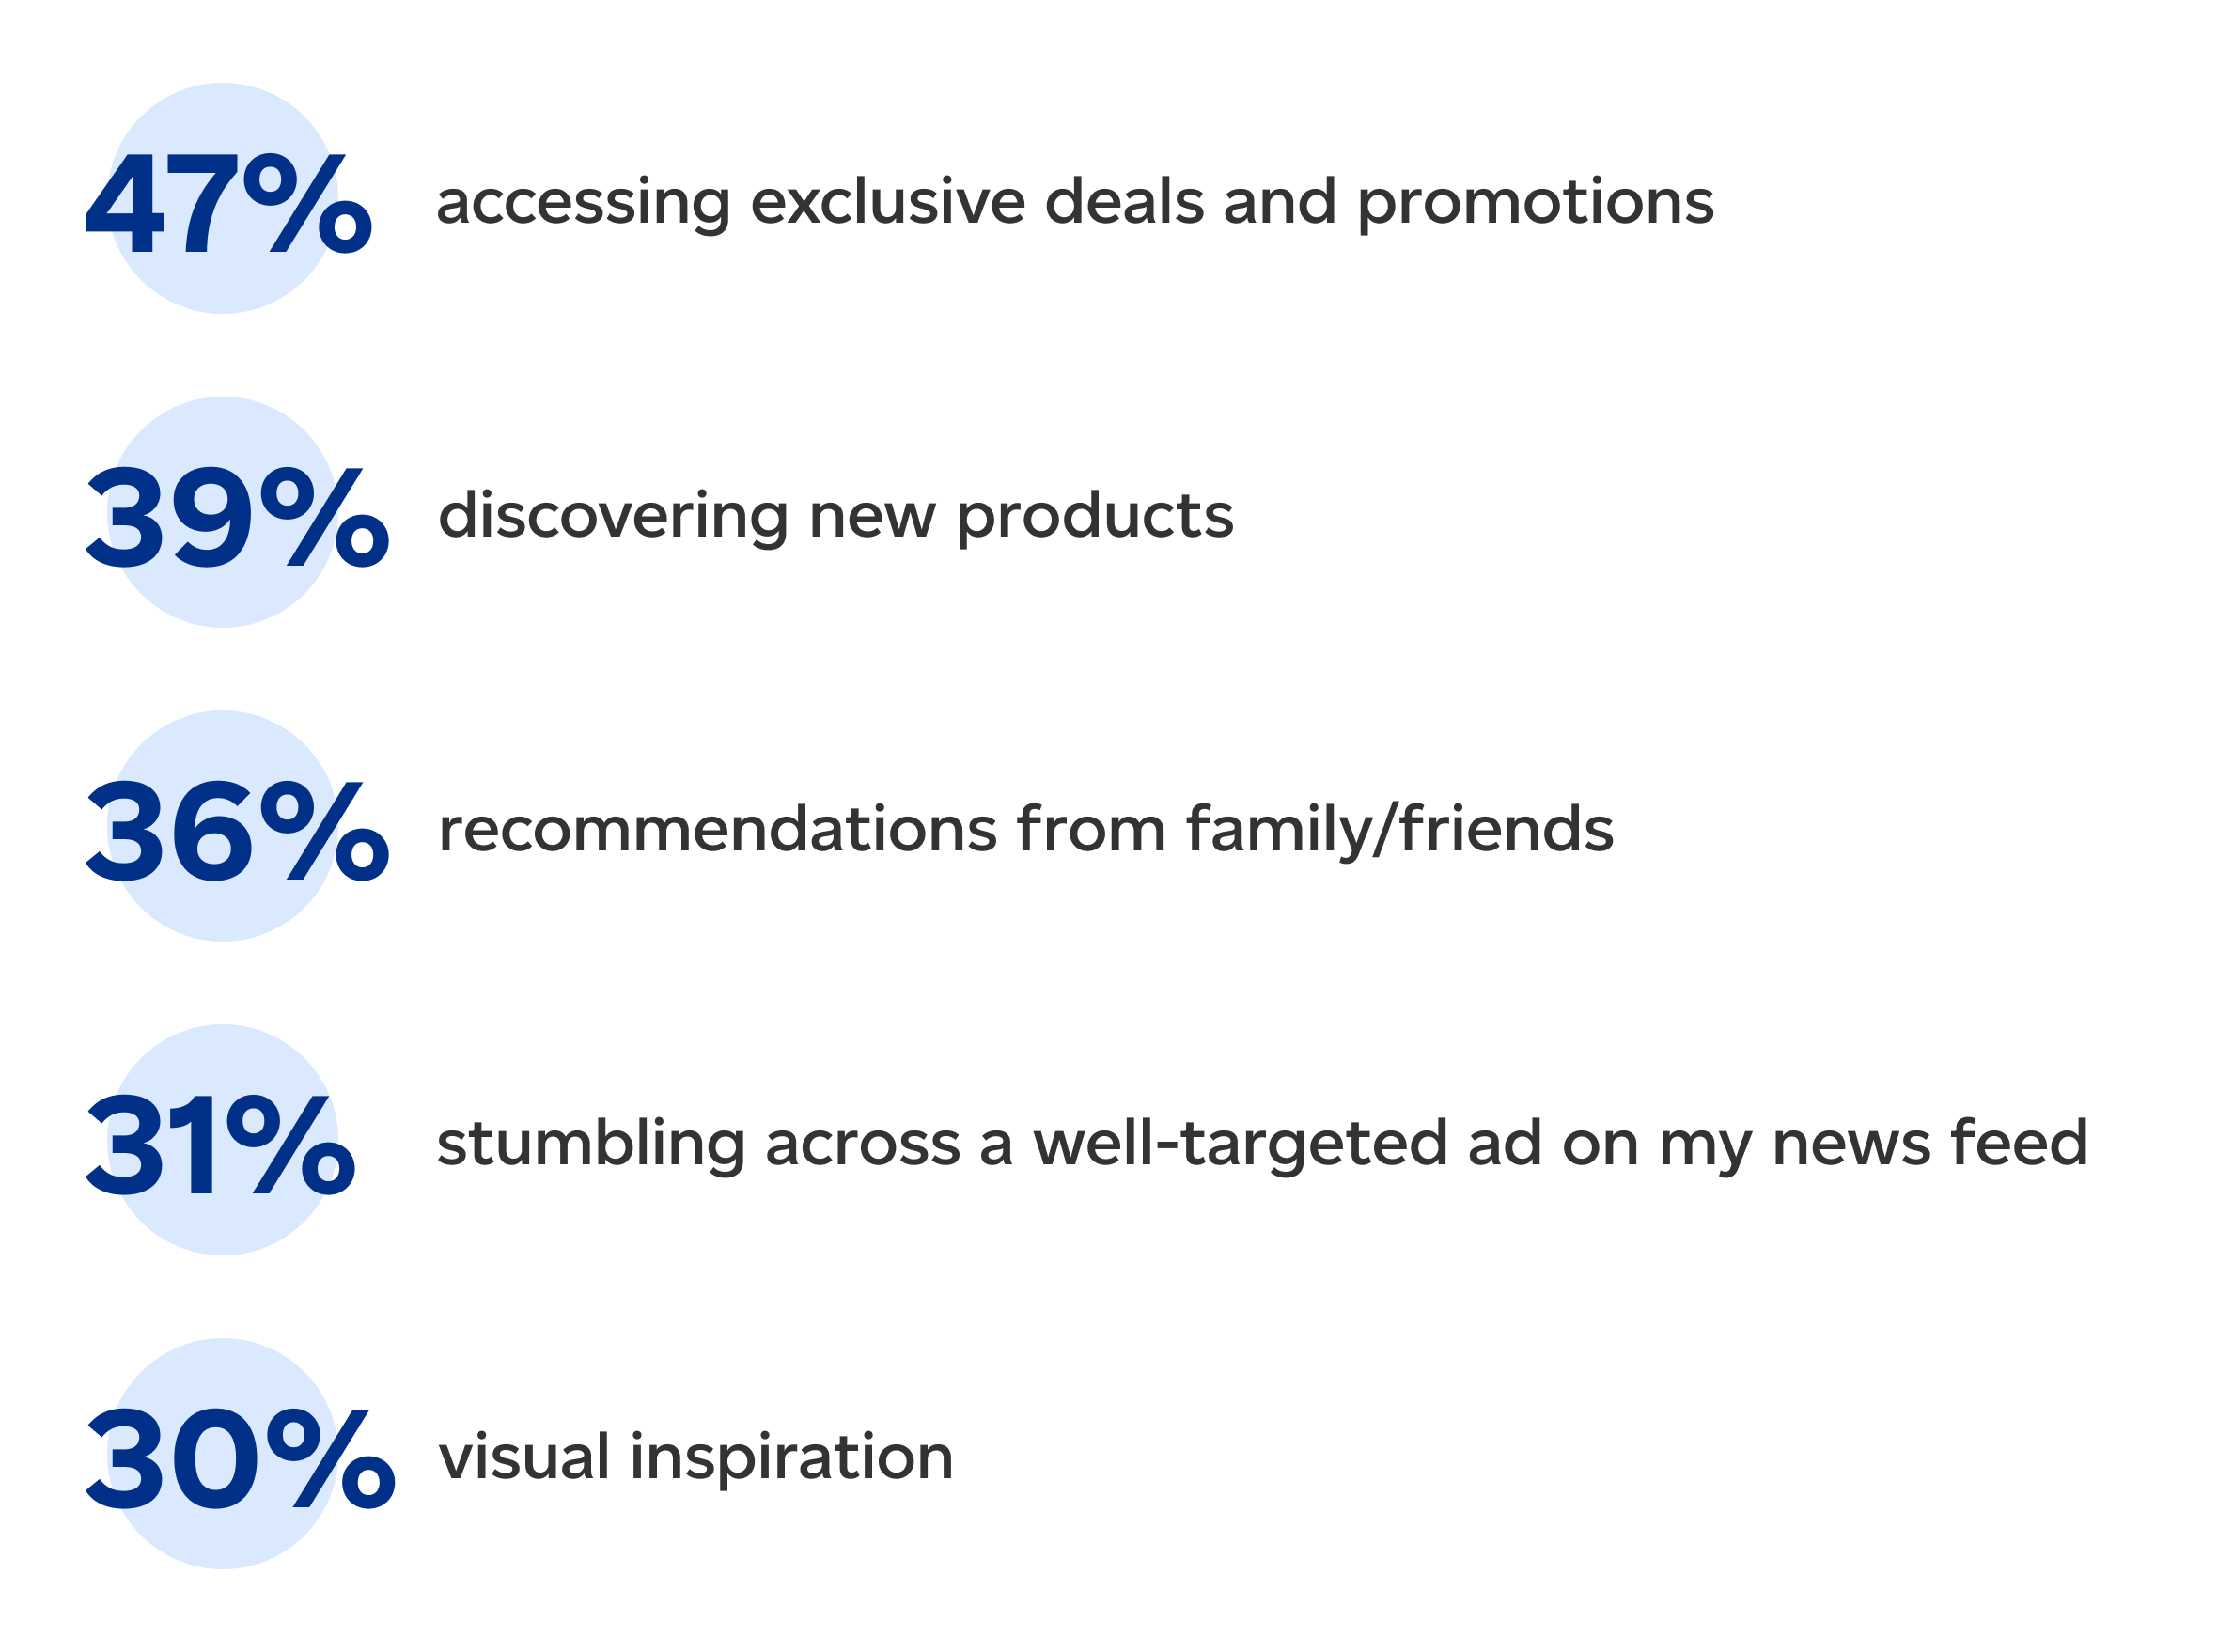 47% accessing exclusive deals and promotions. 39% discovering new products. 36% recommendations from family/friends. 31% stumbling across a well- targeted ad on my news feed. 30% visual inspiration.